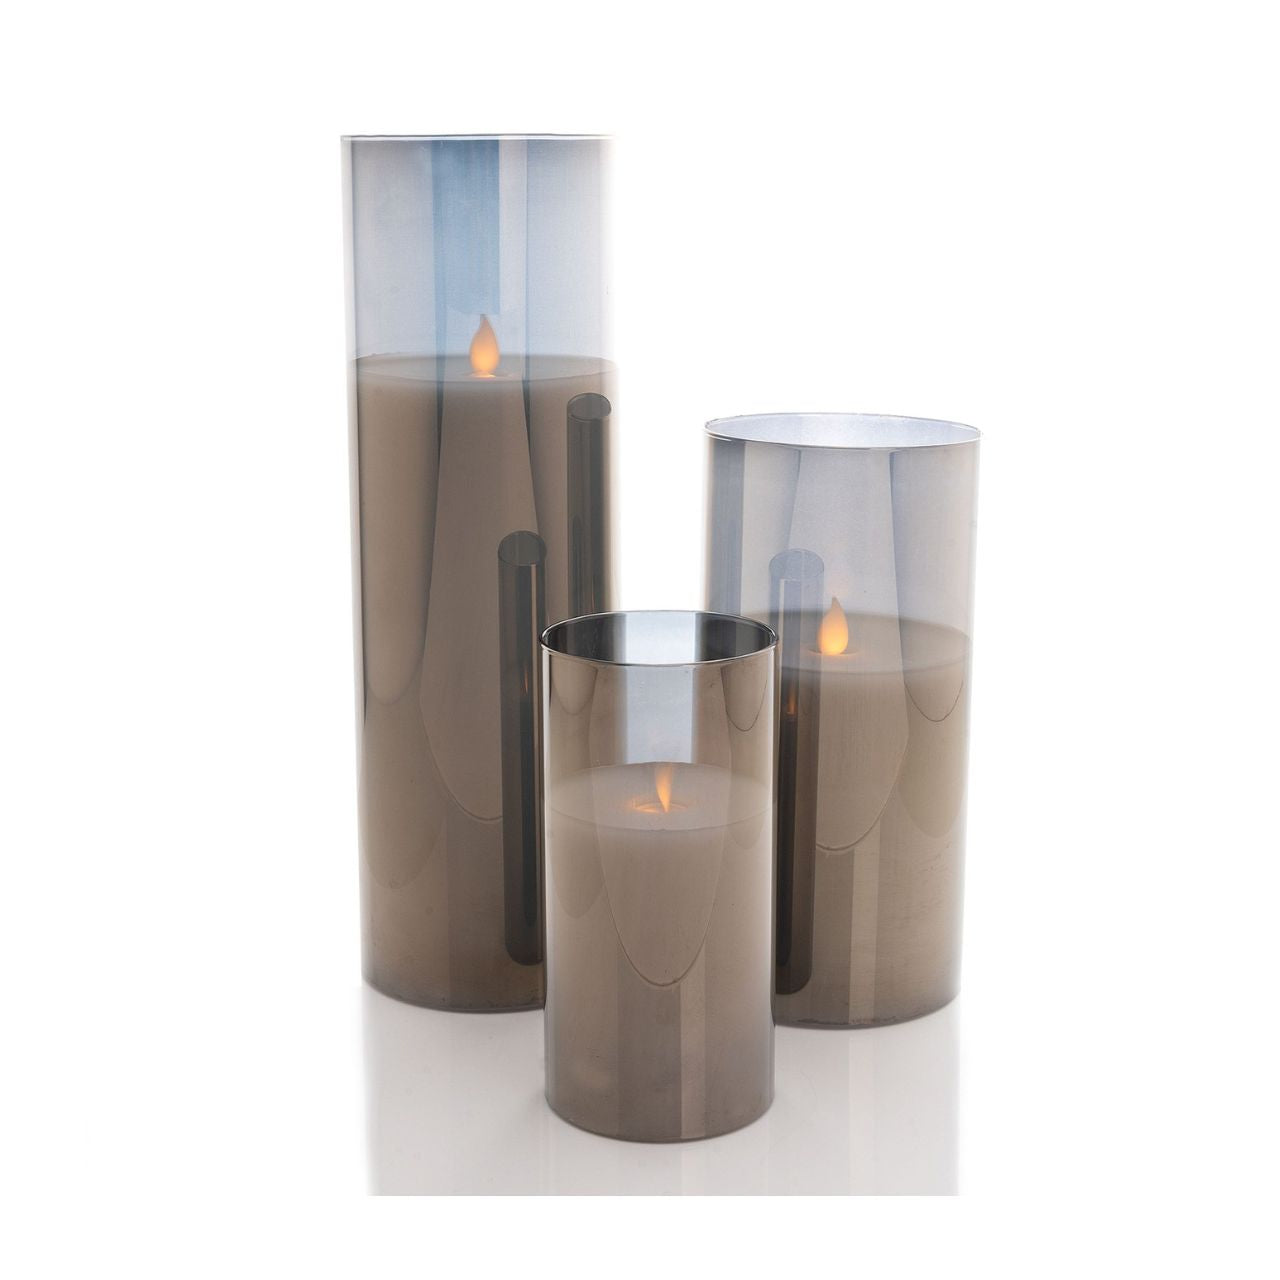 Grey Glass LED Candles Set of 3  Make your home a tranquil place with this set of 3 grey glass candles.  Complete with LED flames, this lighting accessory is well-fitting for a family home.